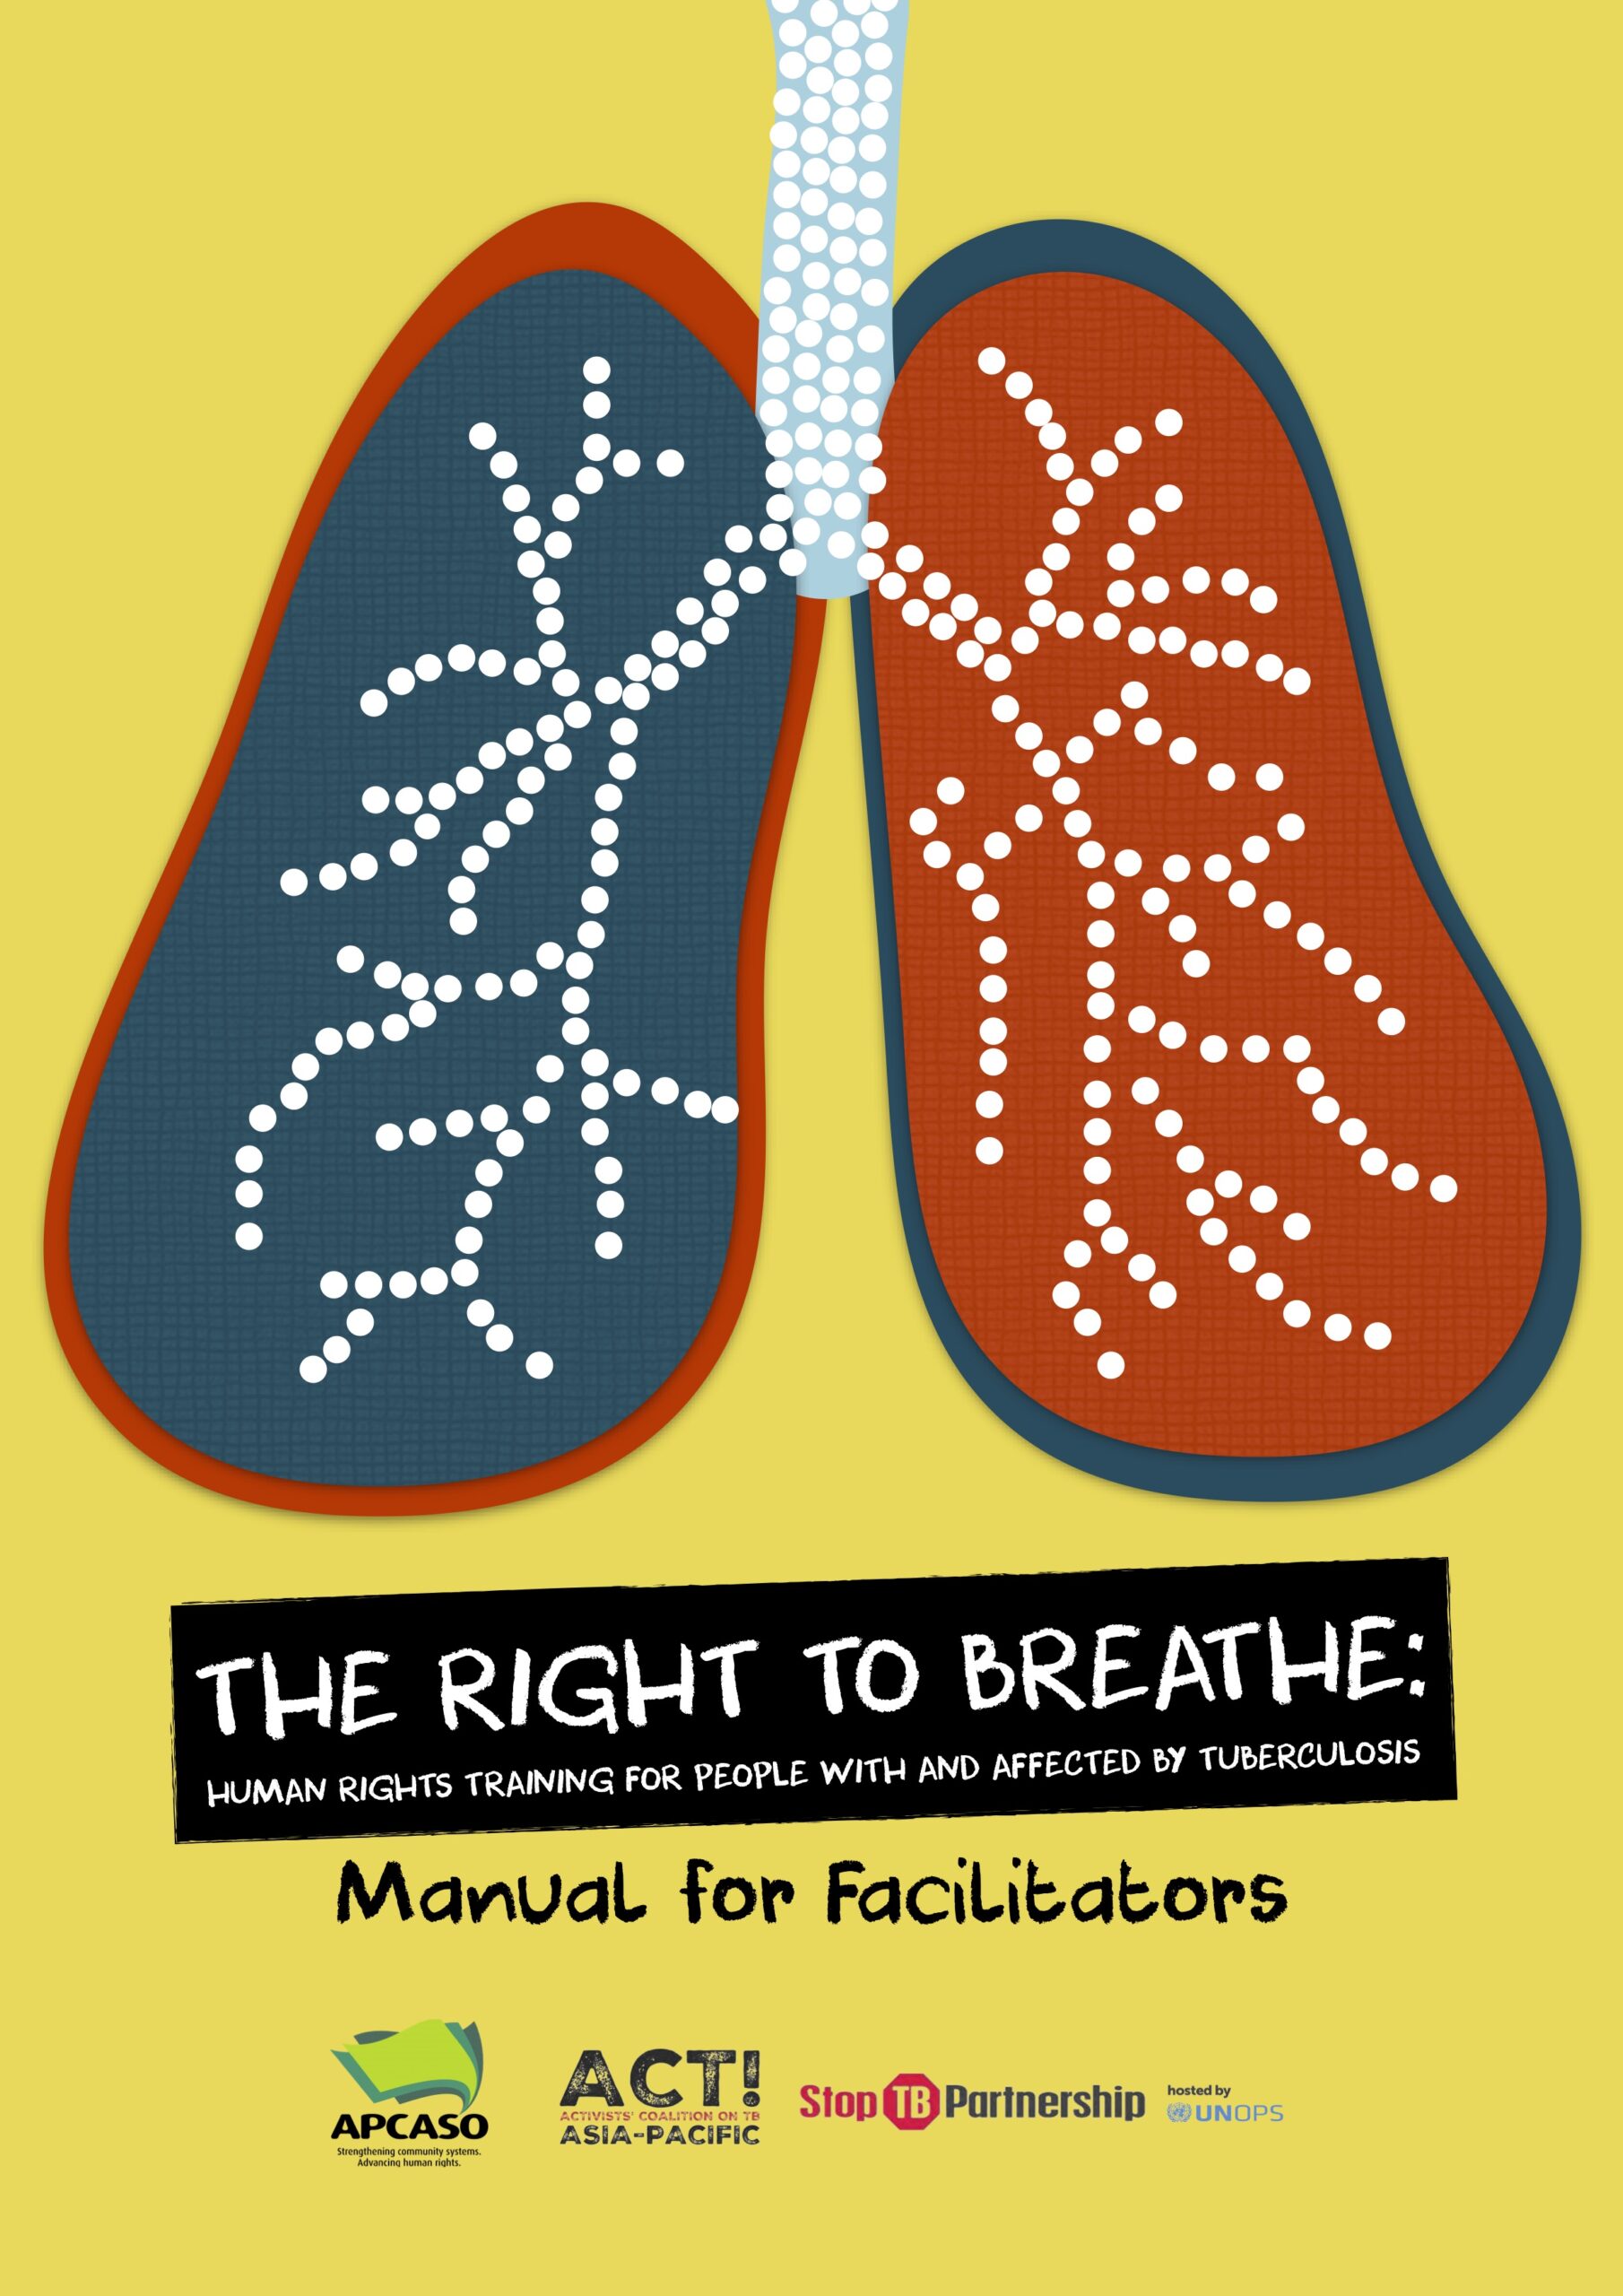 Launch of the Right to Breathe: Human Rights Training for People with and Affected by Tuberculosis